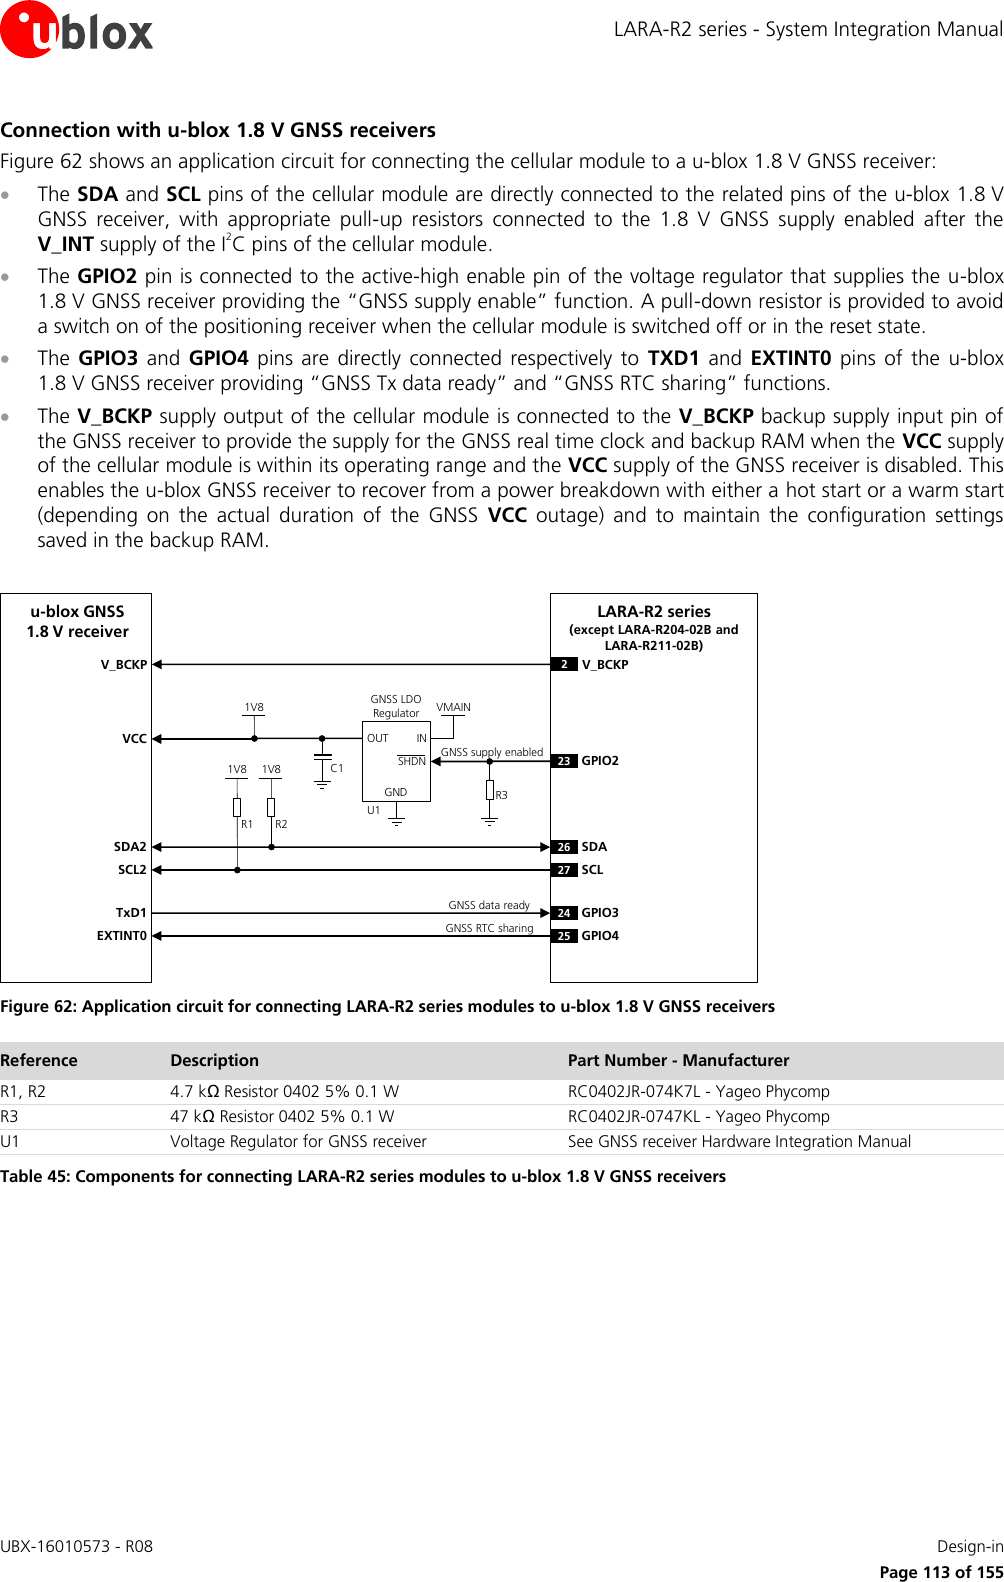 LARA-R2 series - System Integration Manual UBX-16010573 - R08    Design-in     Page 113 of 155 Connection with u-blox 1.8 V GNSS receivers Figure 62 shows an application circuit for connecting the cellular module to a u-blox 1.8 V GNSS receiver:  The SDA and SCL pins of the cellular module are directly connected to the related pins of the u-blox 1.8 V GNSS  receiver,  with  appropriate  pull-up  resistors  connected  to  the  1.8  V  GNSS  supply  enabled  after  the V_INT supply of the I2C pins of the cellular module.  The GPIO2 pin is connected to the active-high enable pin of the voltage regulator that supplies the u-blox 1.8 V GNSS receiver providing the “GNSS supply enable” function. A pull-down resistor is provided to avoid a switch on of the positioning receiver when the cellular module is switched off or in the reset state.  The  GPIO3  and  GPIO4  pins  are  directly  connected  respectively  to  TXD1  and  EXTINT0  pins  of the  u-blox 1.8 V GNSS receiver providing “GNSS Tx data ready” and “GNSS RTC sharing” functions.  The V_BCKP supply output of the cellular module is connected to the V_BCKP backup supply input pin of the GNSS receiver to provide the supply for the GNSS real time clock and backup RAM when the VCC supply of the cellular module is within its operating range and the VCC supply of the GNSS receiver is disabled. This enables the u-blox GNSS receiver to recover from a power breakdown with either a hot start or a warm start (depending  on  the  actual  duration  of  the  GNSS  VCC  outage)  and  to  maintain  the  configuration  settings saved in the backup RAM.  R1INOUTGNDGNSS LDORegulatorSHDNu-blox GNSS1.8 V receiverSDA2SCL2R21V8 1V8VMAIN1V8U123 GPIO2SDASCLC1TxD1EXTINT0GPIO3GPIO426272425VCCR3V_BCKP V_BCKP2GNSS data readyGNSS RTC sharingGNSS supply enabledLARA-R2 series(except LARA-R204-02B and LARA-R211-02B) Figure 62: Application circuit for connecting LARA-R2 series modules to u-blox 1.8 V GNSS receivers Reference Description Part Number - Manufacturer R1, R2 4.7 kΩ Resistor 0402 5% 0.1 W  RC0402JR-074K7L - Yageo Phycomp R3 47 kΩ Resistor 0402 5% 0.1 W  RC0402JR-0747KL - Yageo Phycomp U1 Voltage Regulator for GNSS receiver See GNSS receiver Hardware Integration Manual Table 45: Components for connecting LARA-R2 series modules to u-blox 1.8 V GNSS receivers  